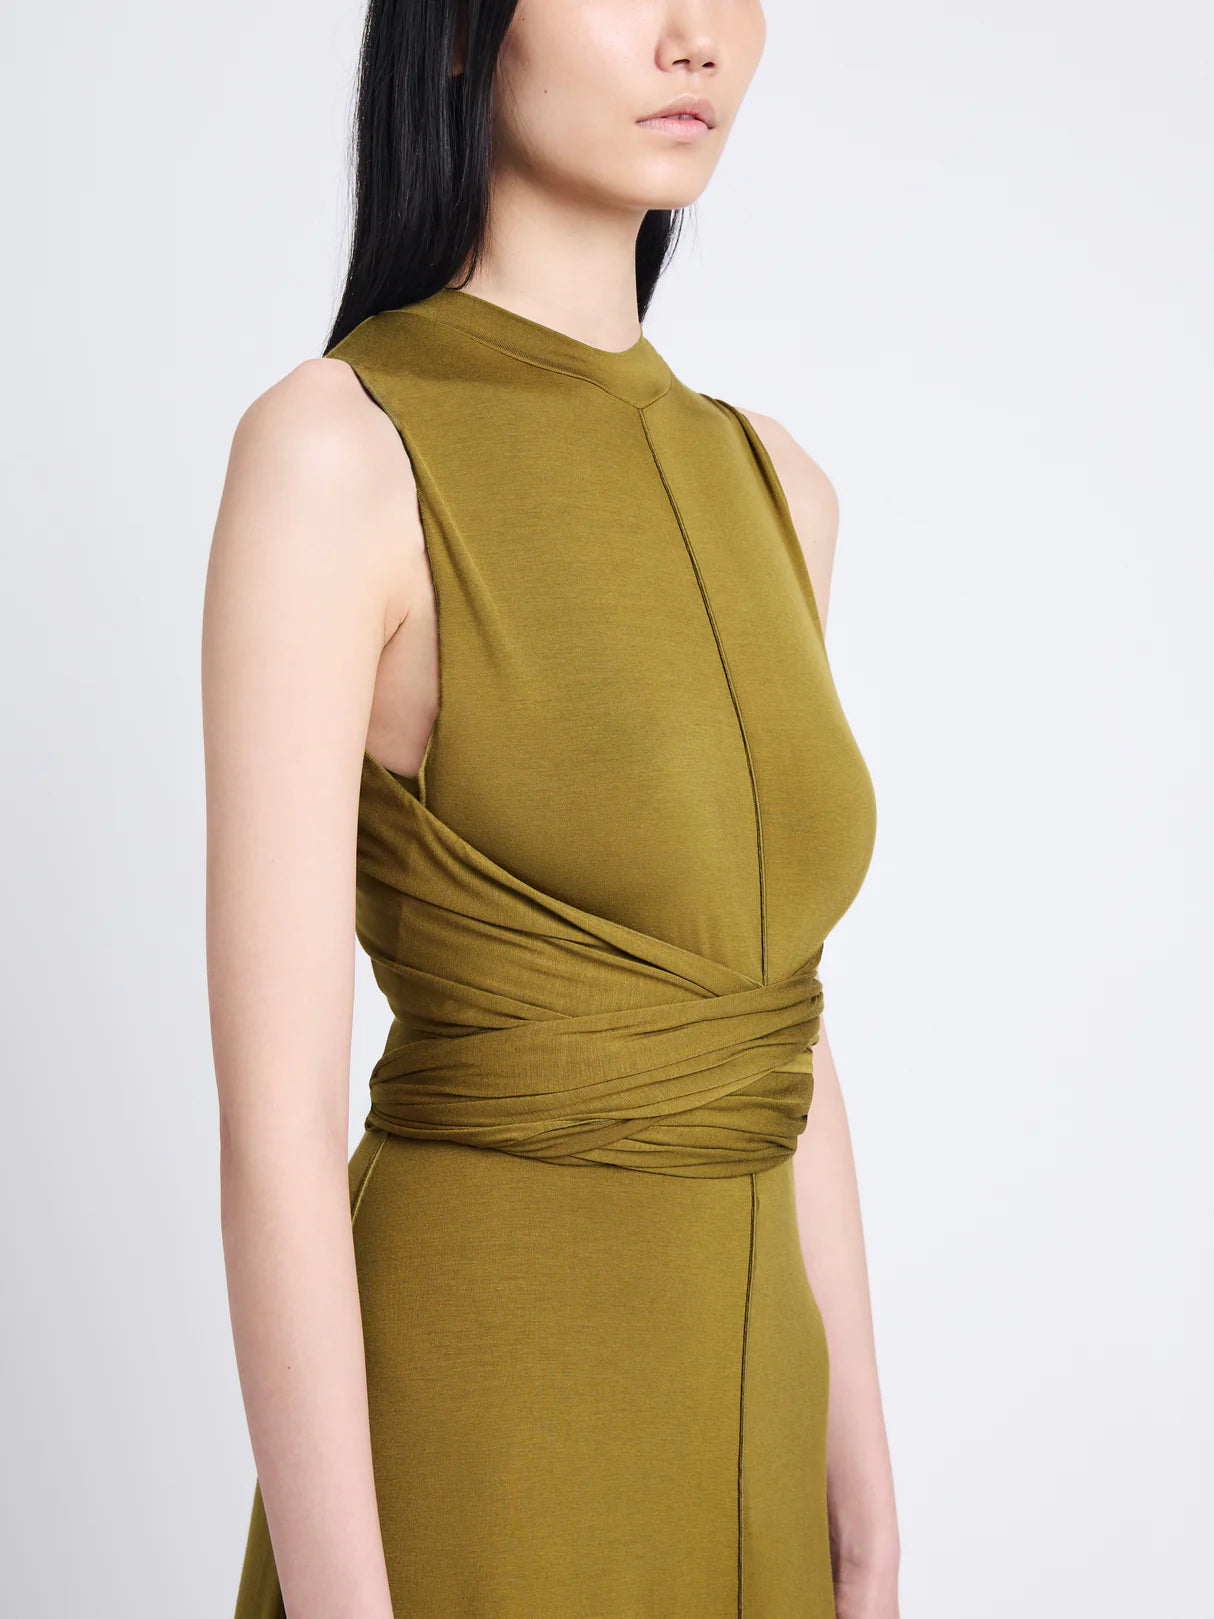 Beatrice Dress in Solid Jersey - More Colors Available